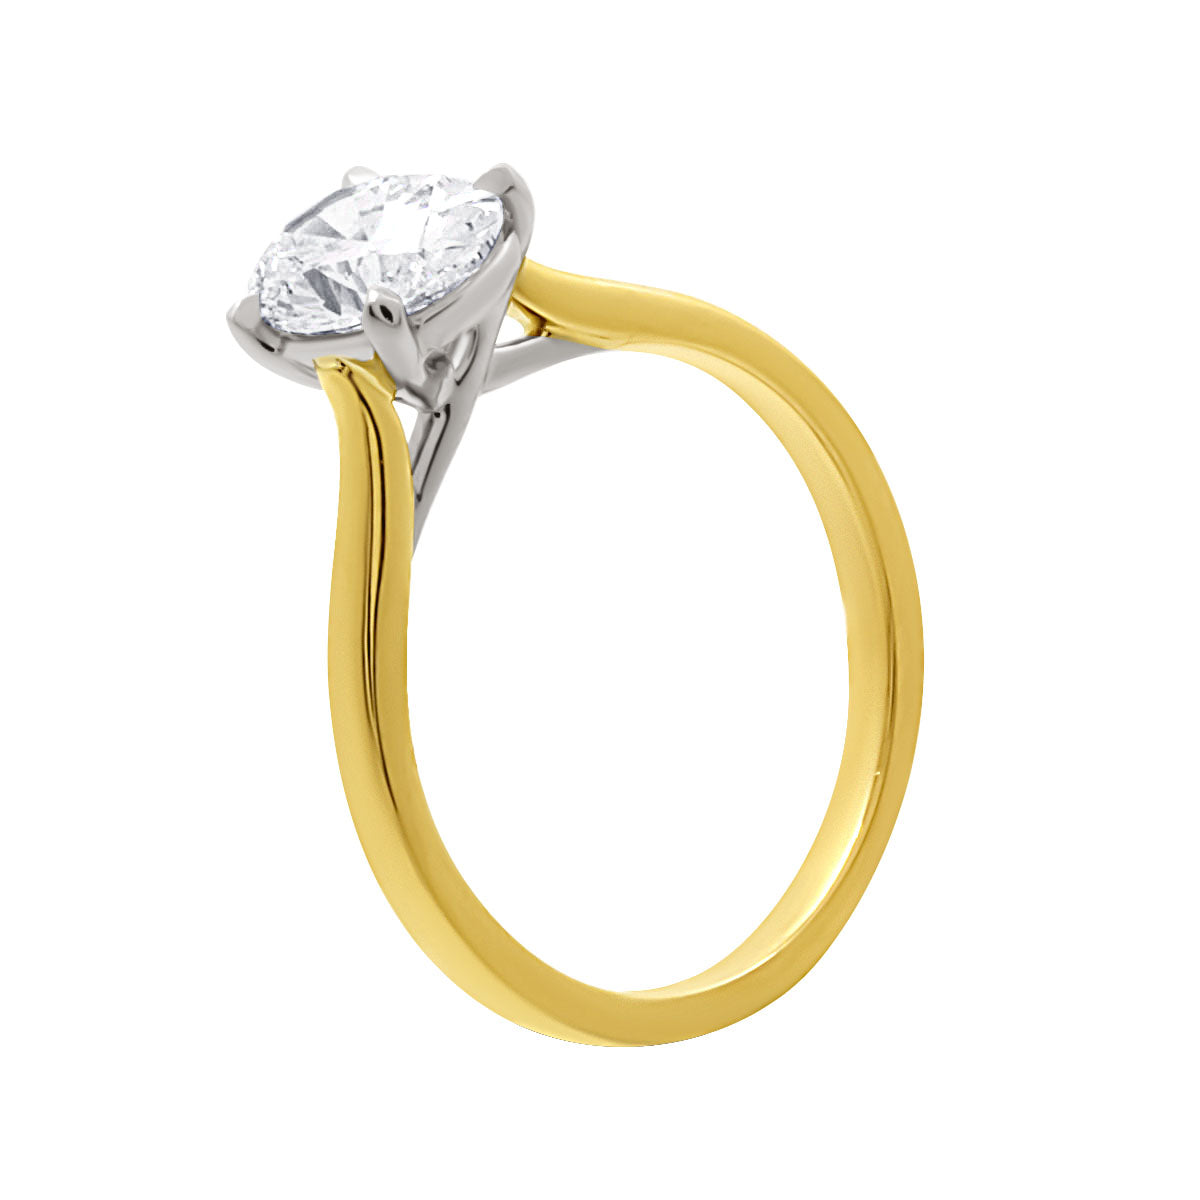 Round Solitaire With Criss Cross Shank in 18kt yellow gold shank with white gold collet